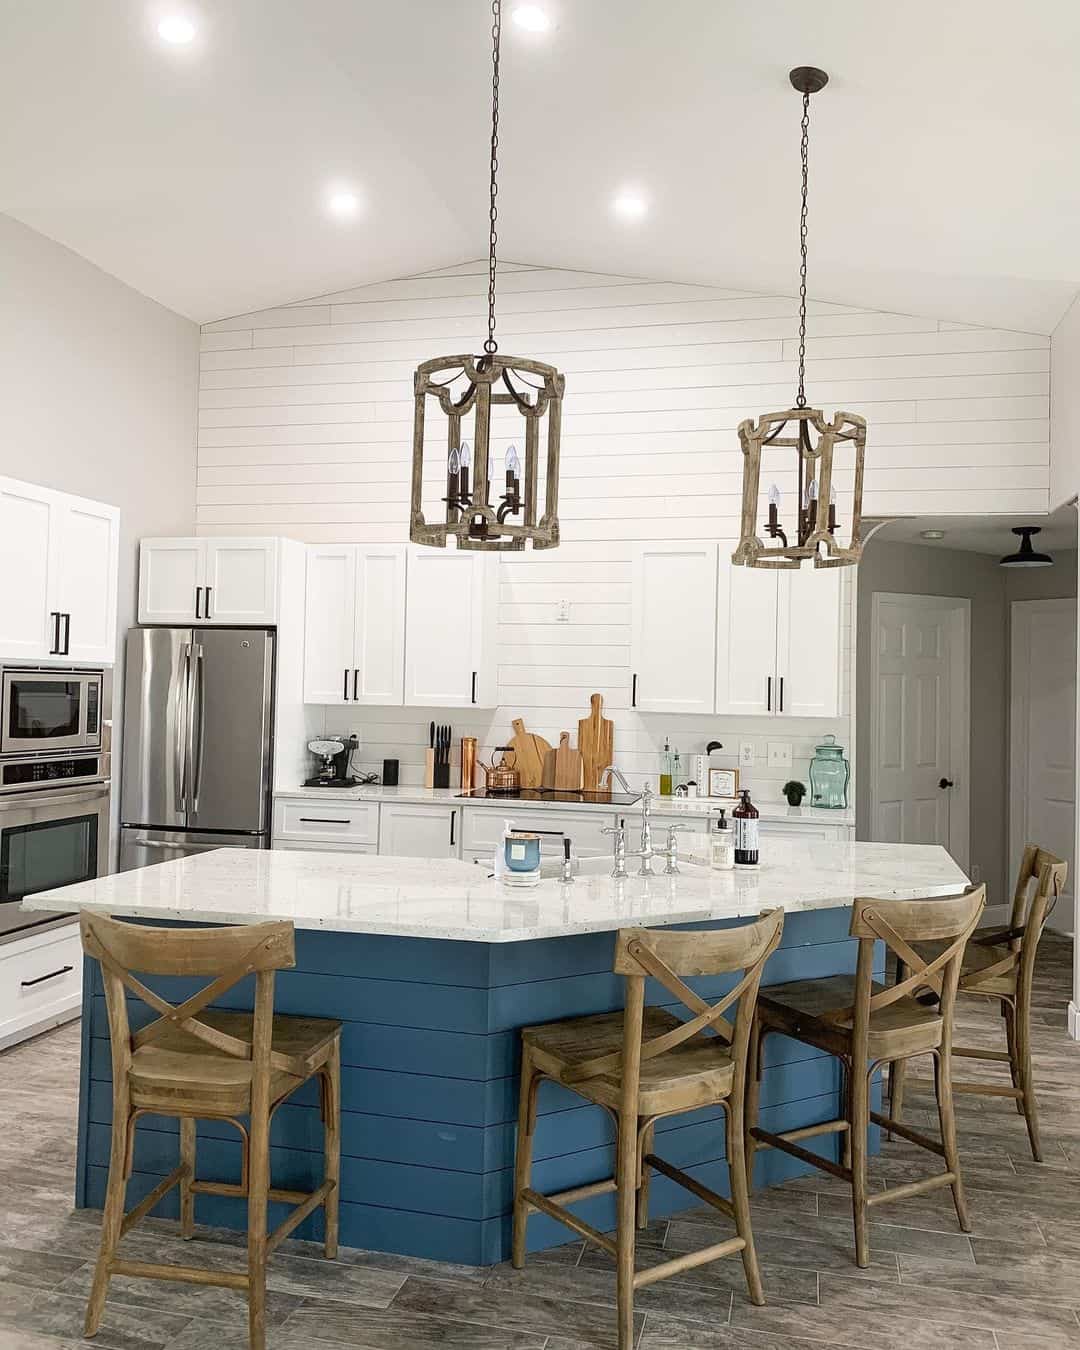 Rustic Charms of a Blue Kitchen Island